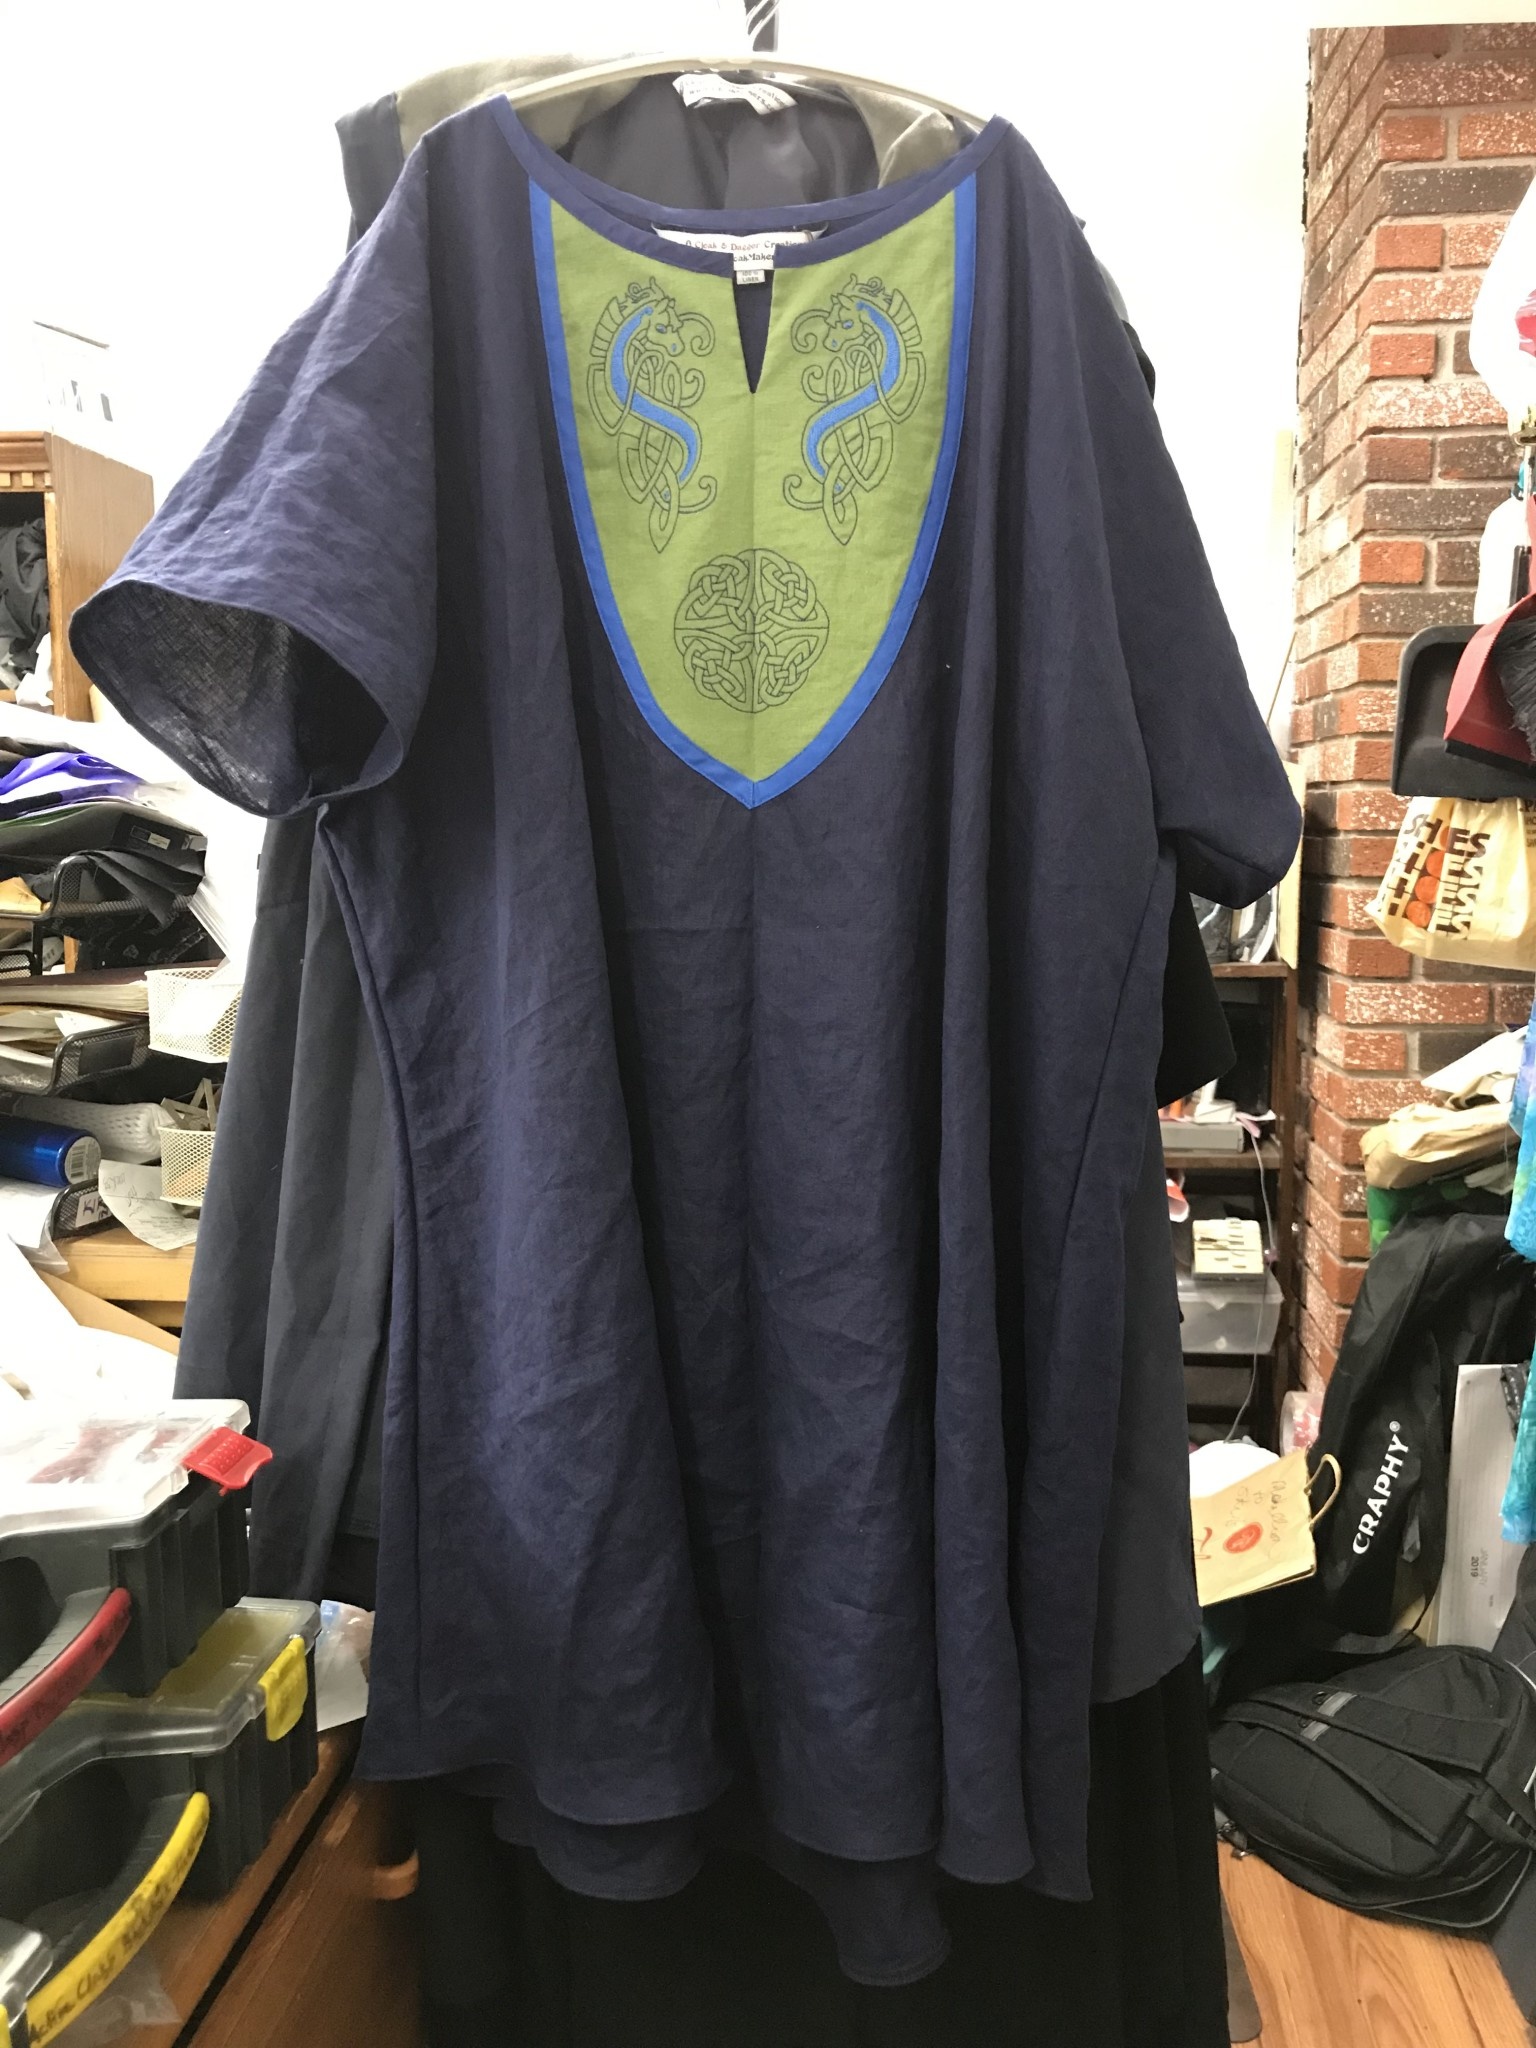 J774 - Dark Blue Short Sleeve Tunic w/Celtic Horse and Round Knot  Embroidery in Blues on Green Panel w/ Bright Blue Edging